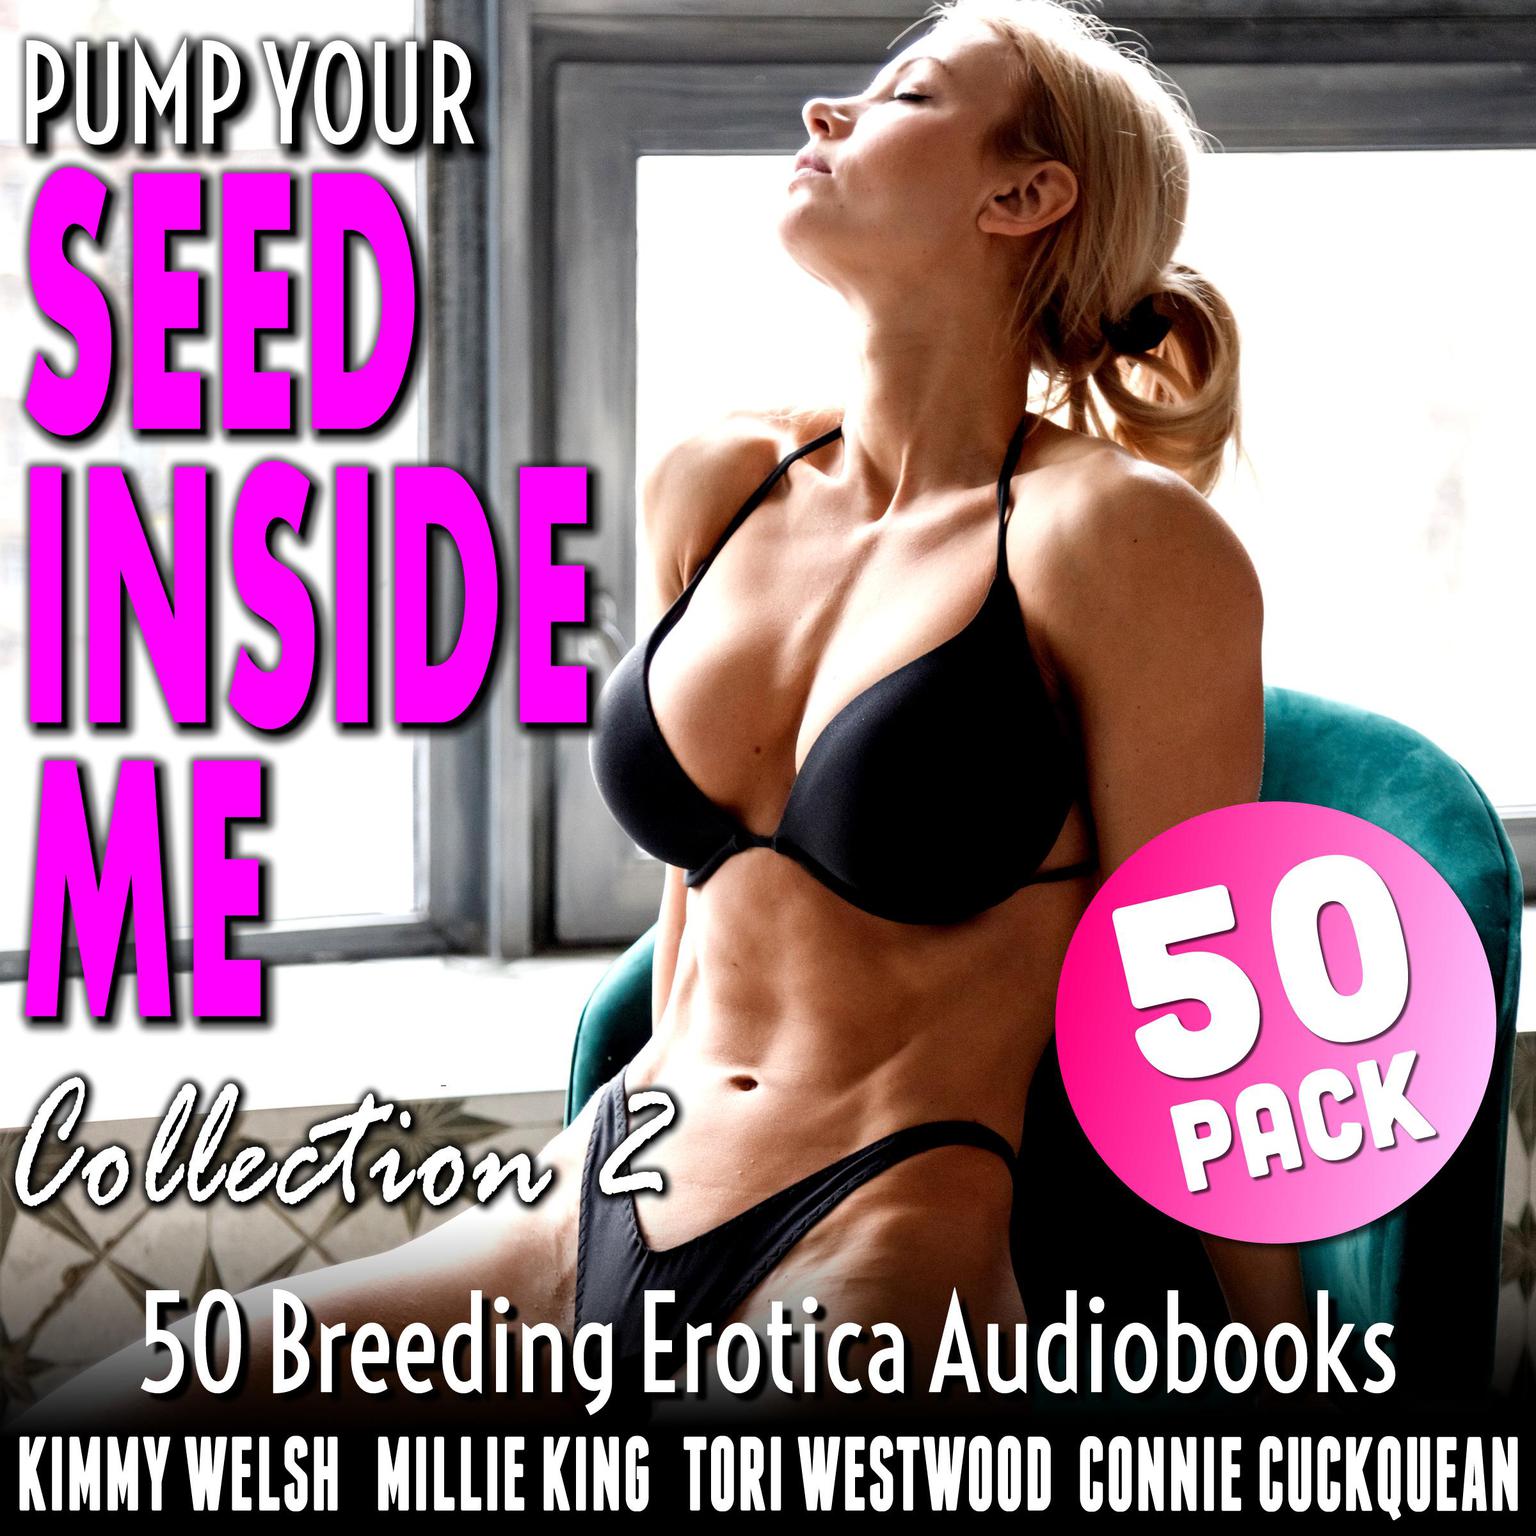 Pump Your Seed Inside Me 50-Pack : Collection 2 (50 More Breeding Erotica Audiobooks) Audiobook, by Tori Westwood